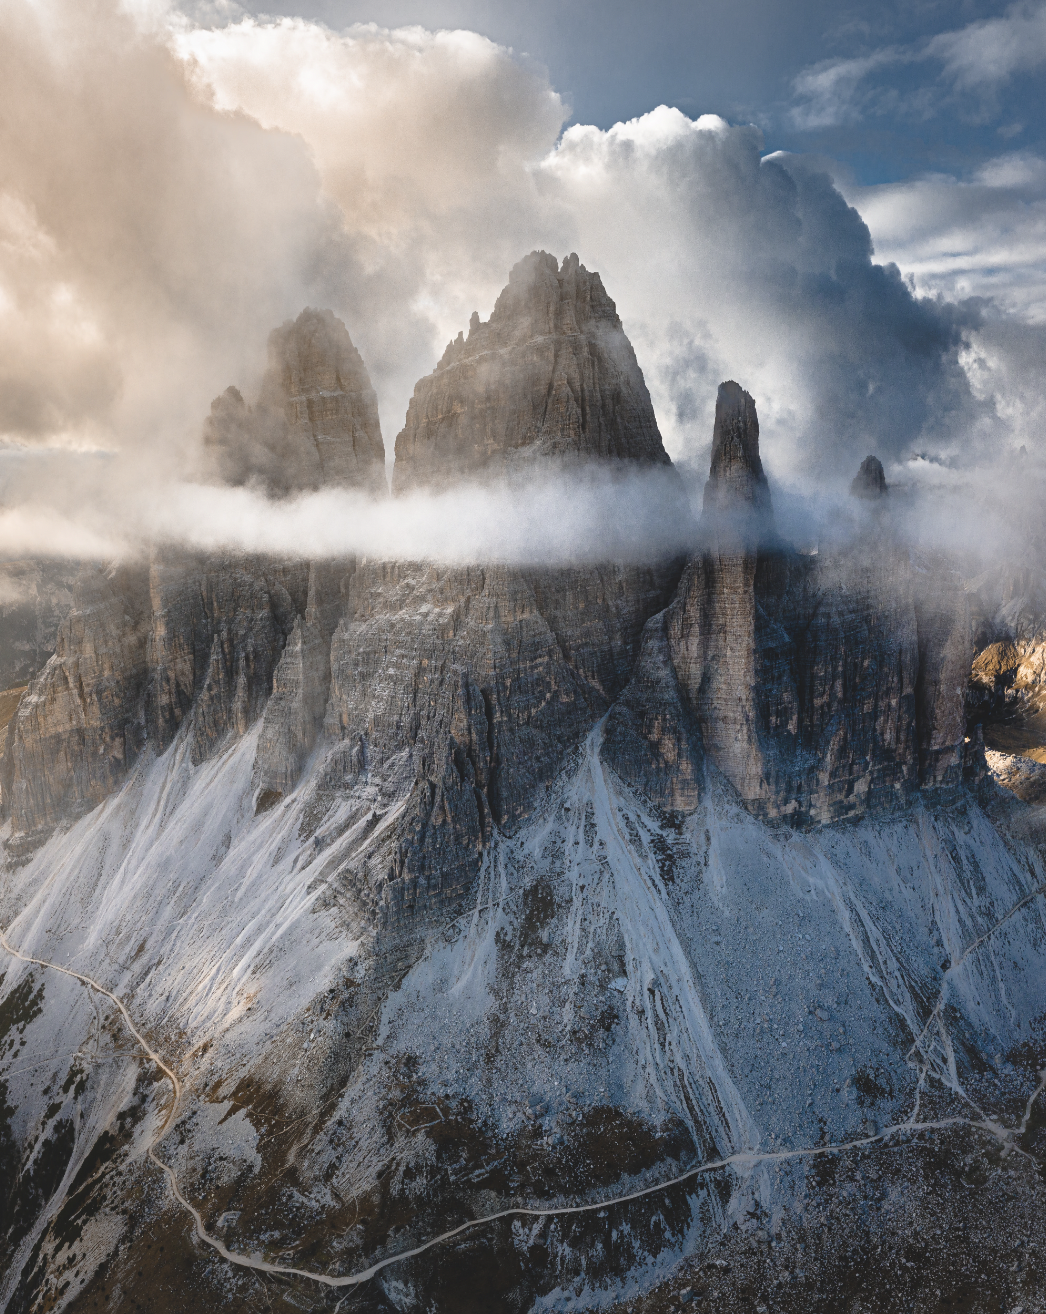 A drone photograph of the Dolomites in Italy with clouds hovering behind and above the snowy peaks.